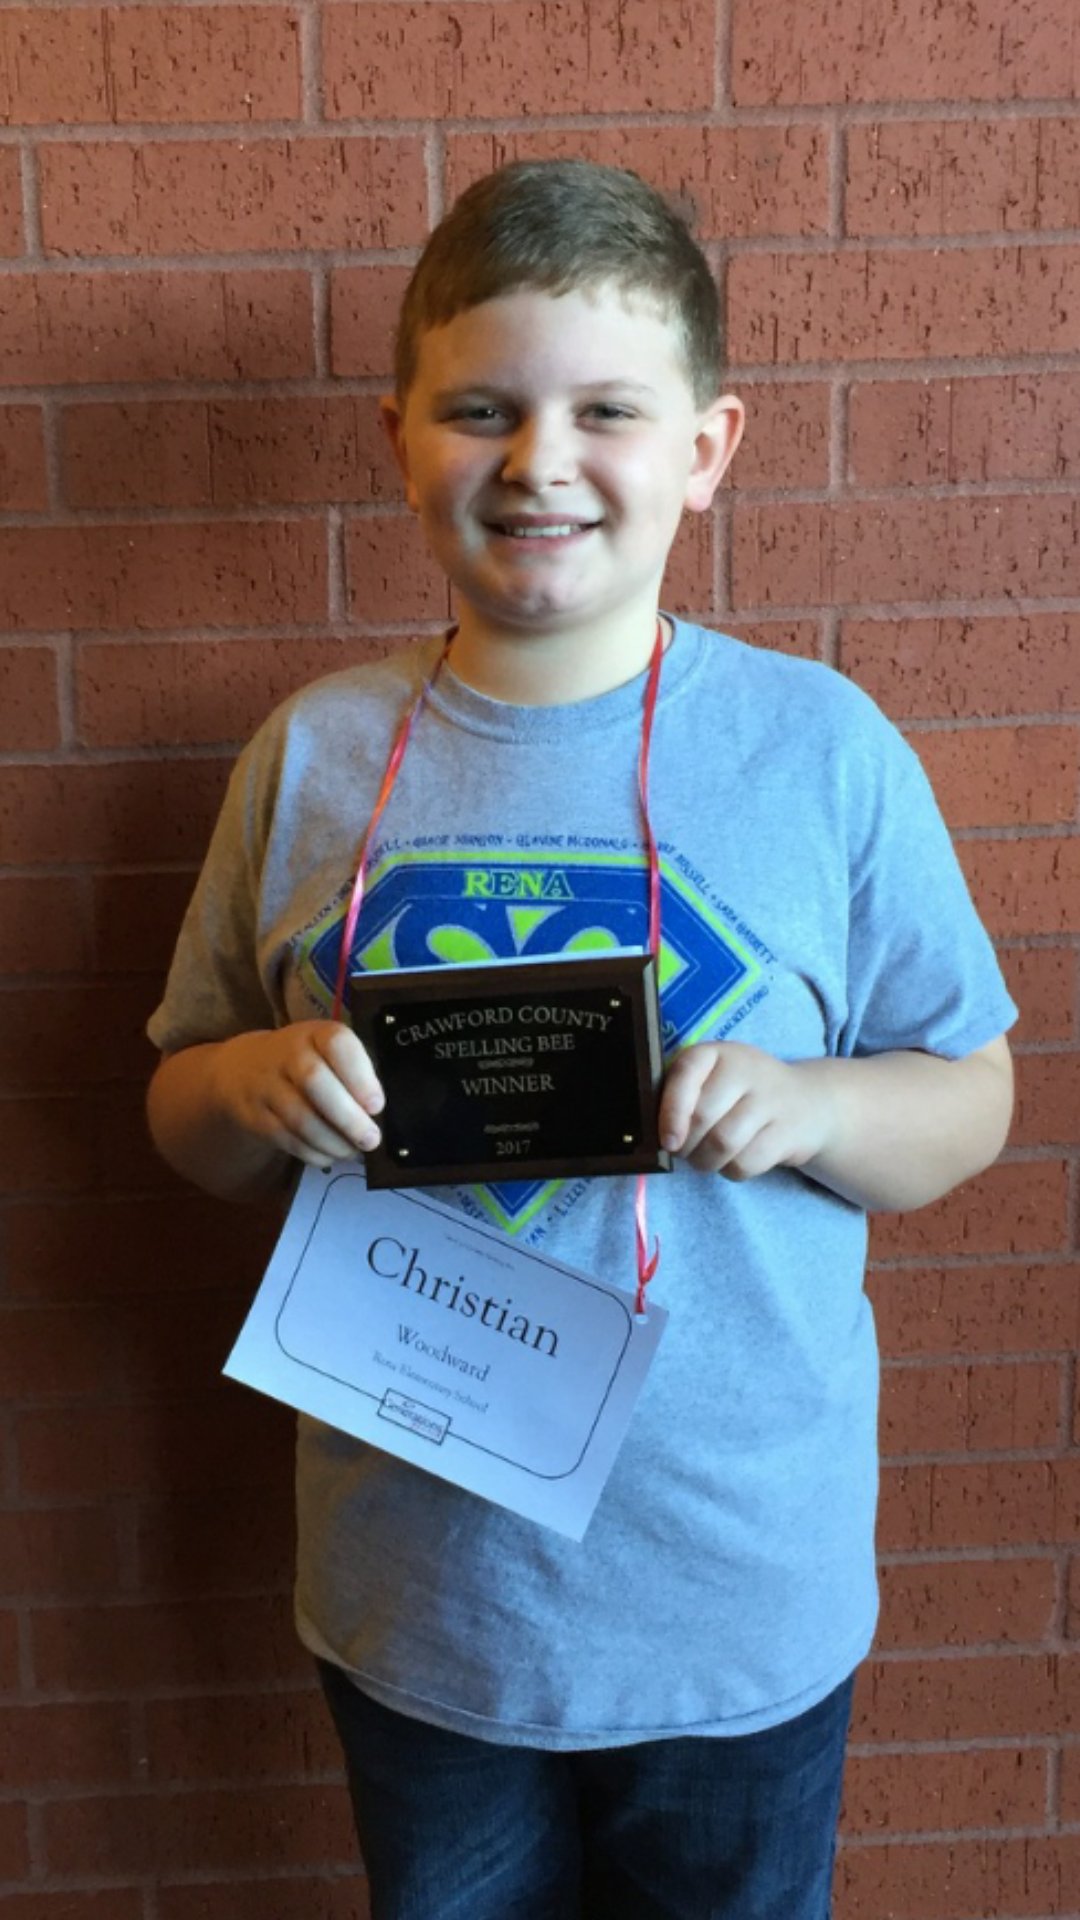 Crawford County Spelling Bee Champion!!!